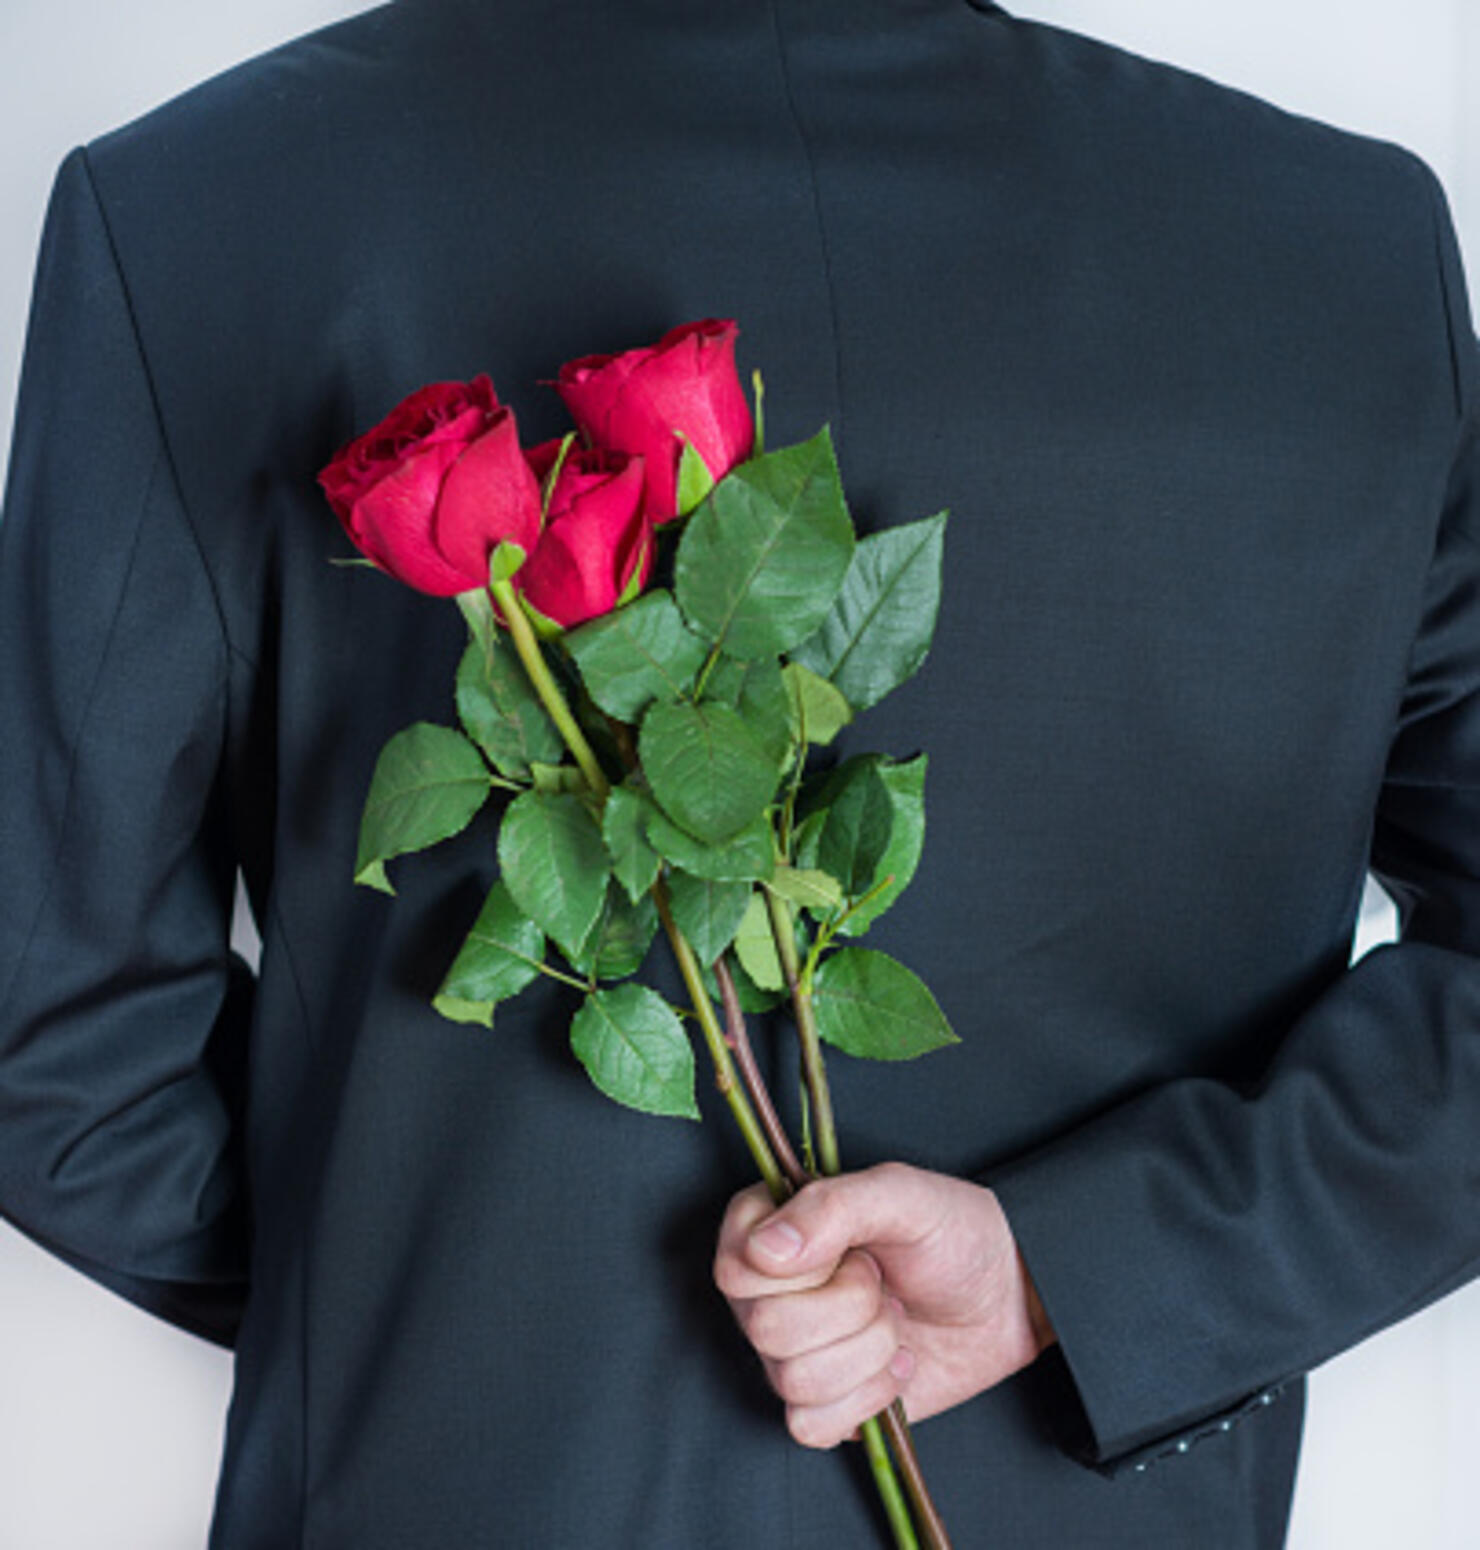 Elegant man holding red rose flowers in hand behind his back